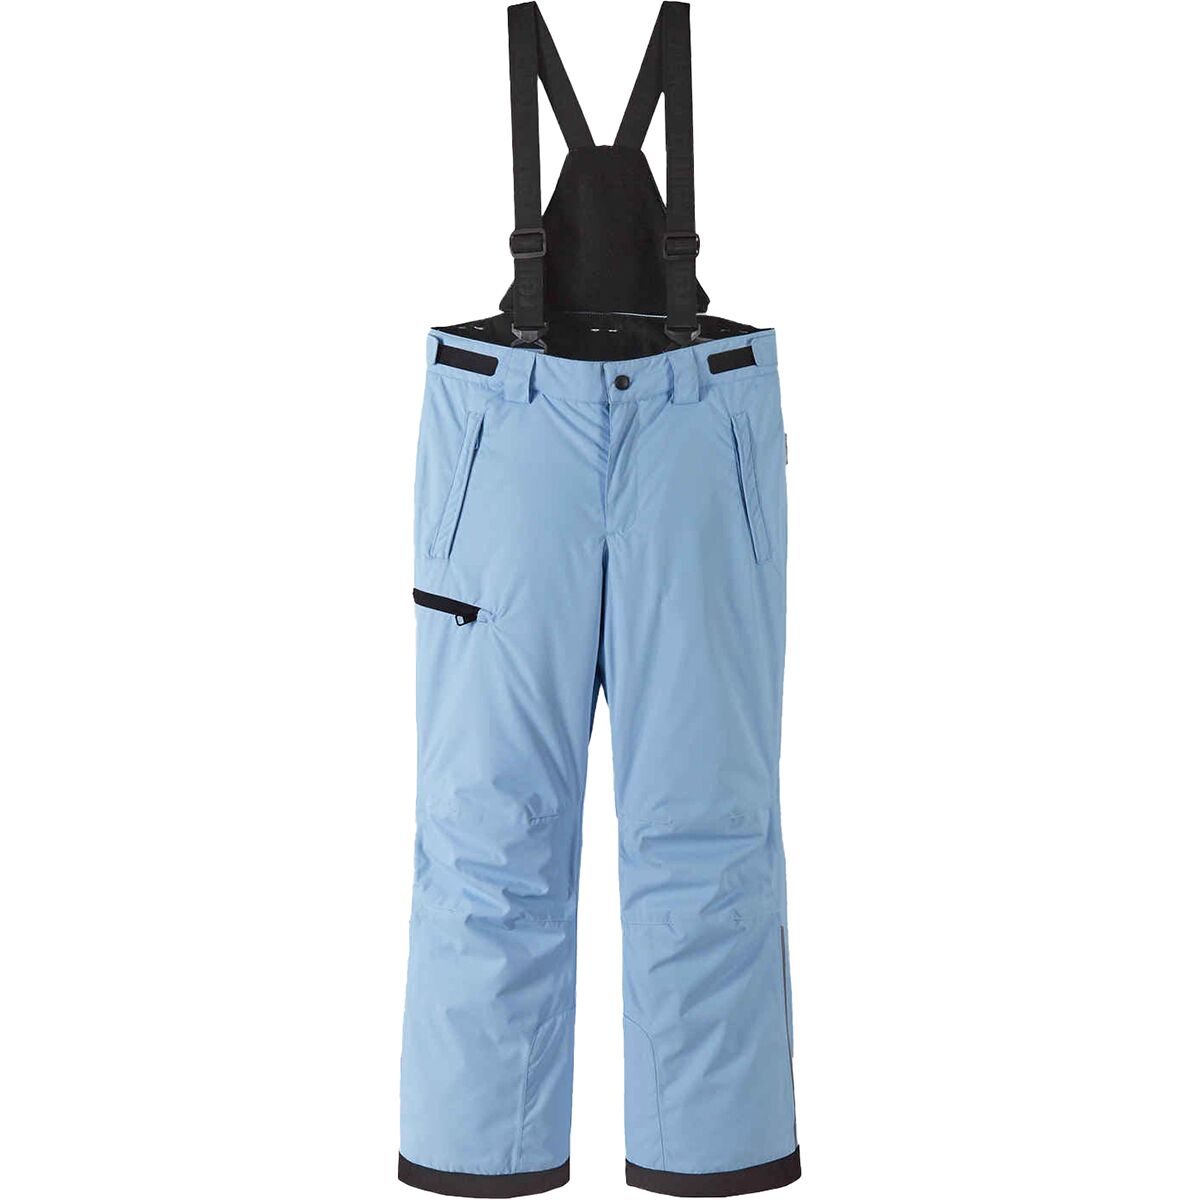 Reima Terrie Pant - Toddlers'